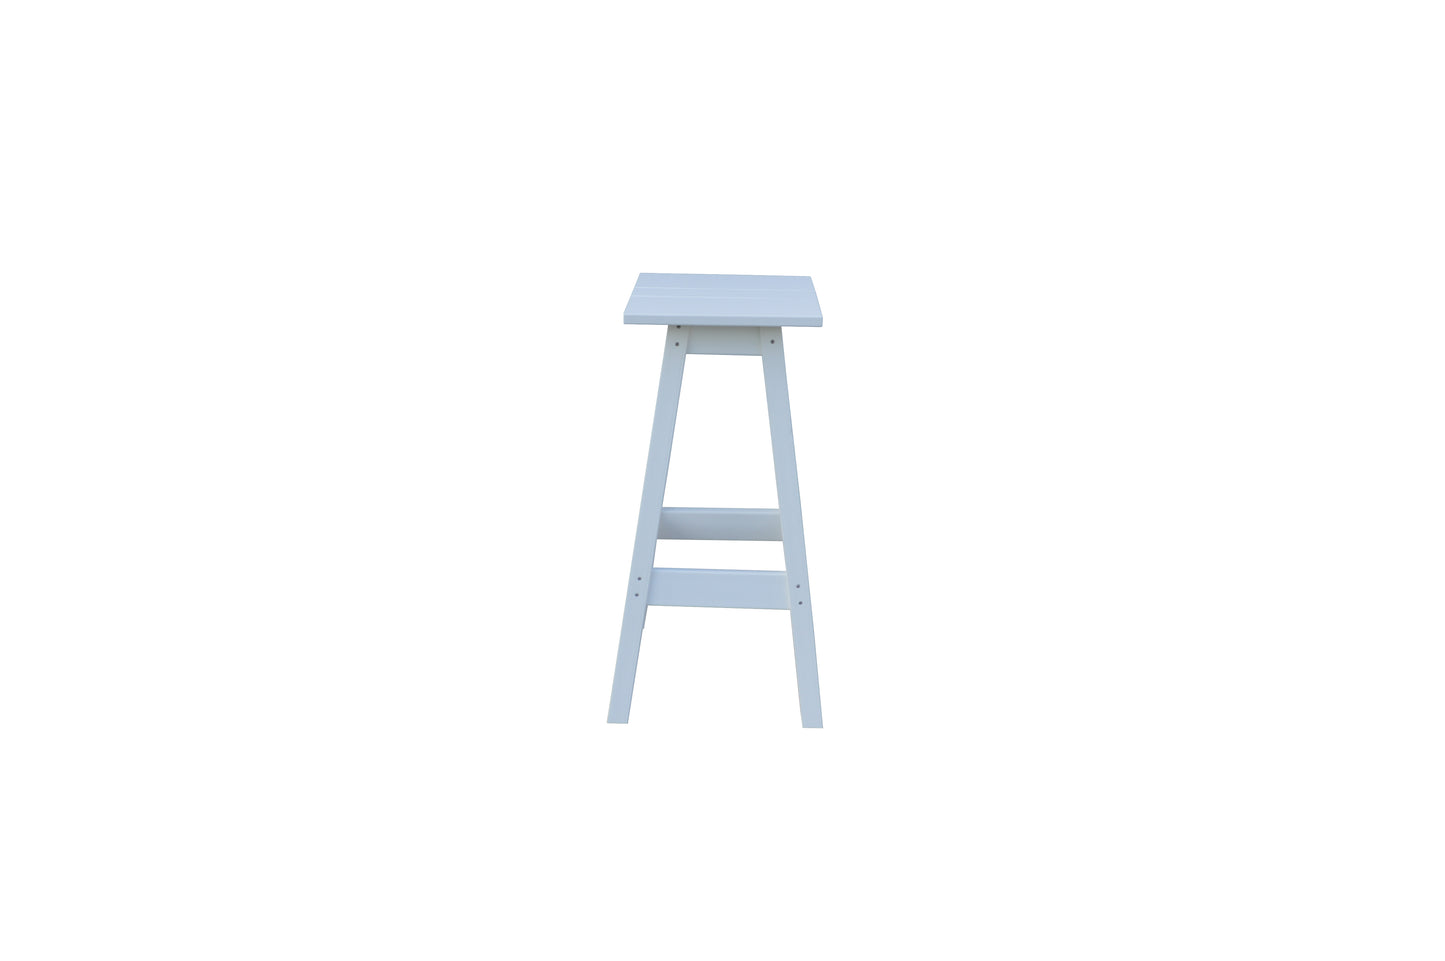 A&L Furniture Co. Recycled Plastic Square Bar Stool - LEAD TIME TO SHIP 10 BUSINESS DAYS